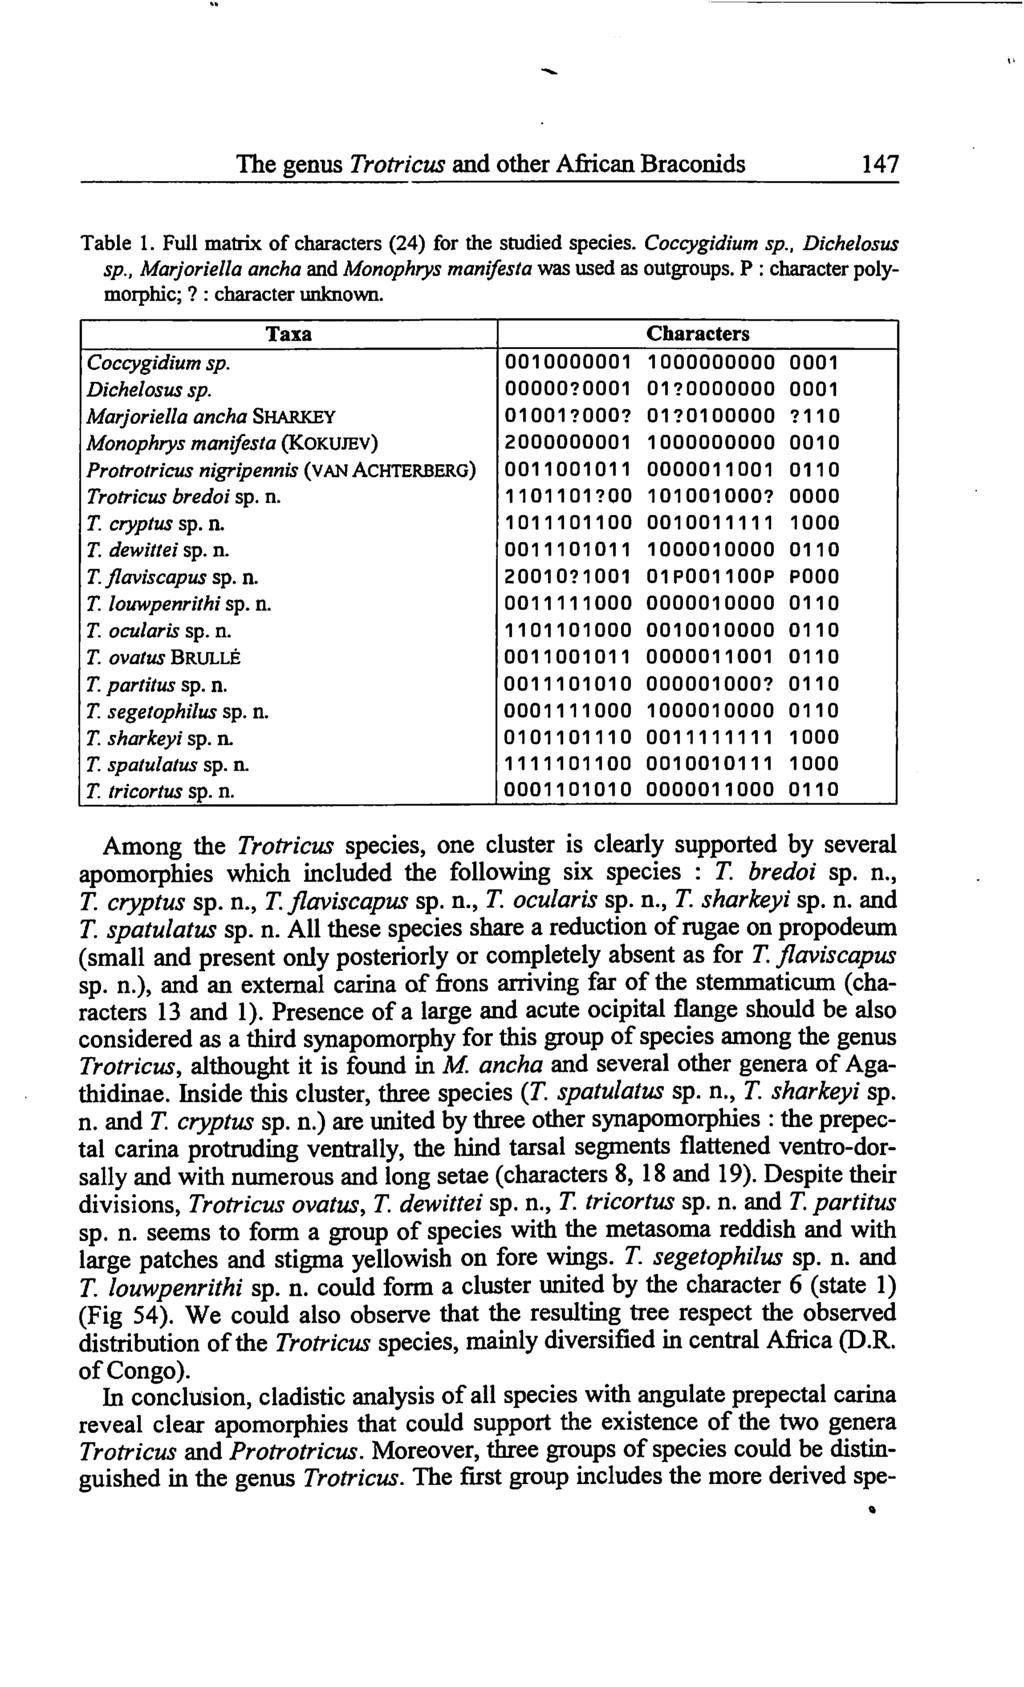 The genus Trotricus and other African Braconids 147 Table 1. Full matrix of characters (24) for the studied species. Coccygidium sp., Dichelosus sp.